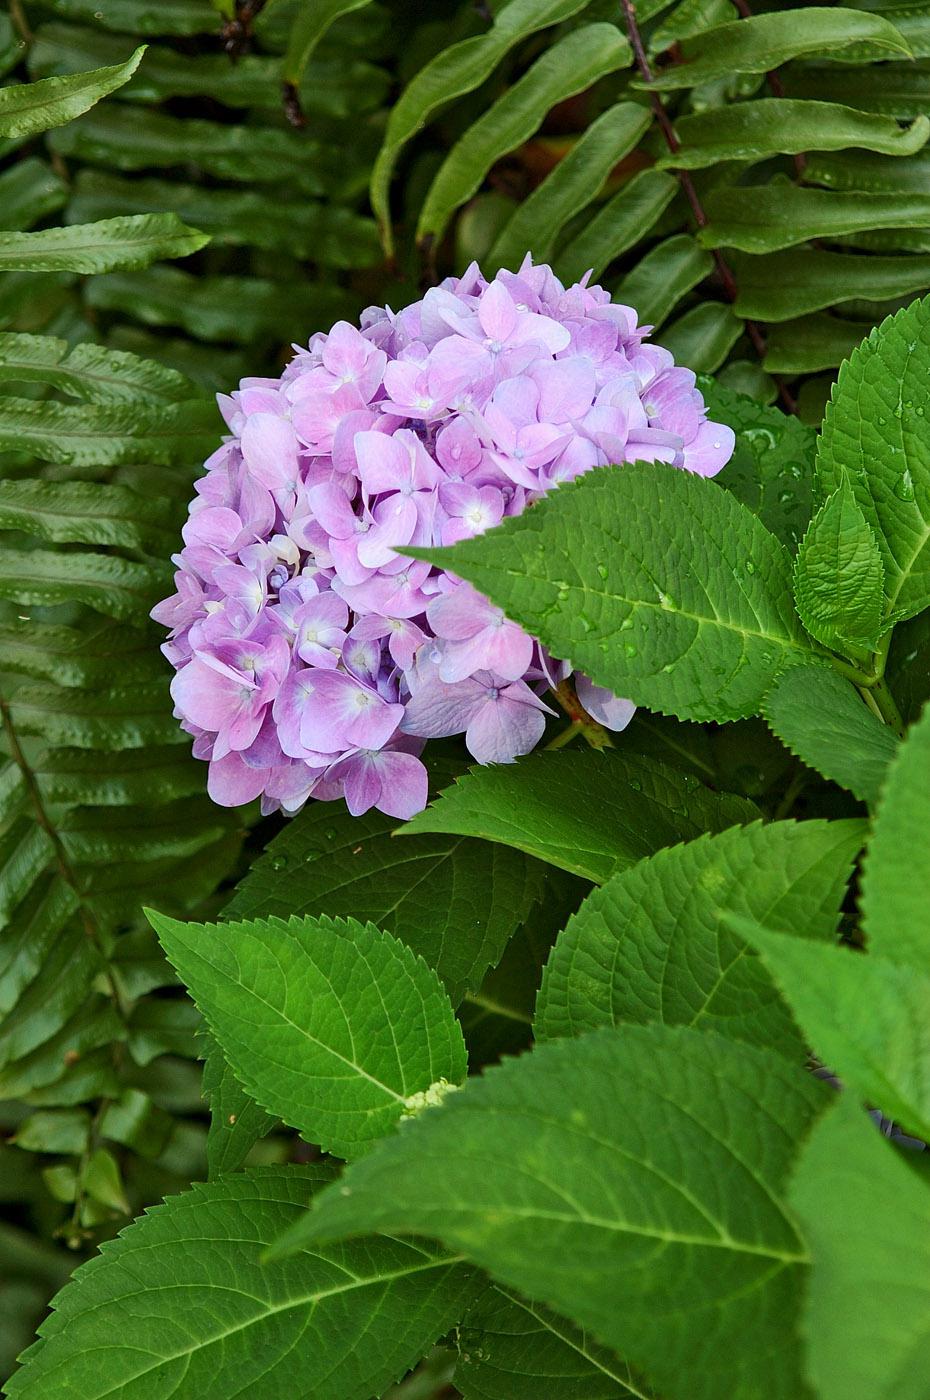 Endless Summer hydrangea blooms on old wood as well as new growth, which means a longer bloom season. Flower color on most big-leaved hydrangea varieties depends on soil acidity. The lilac color of this blossom reveals that this plant is growing in soil in the low to middle range of acidity. Lower pH levels produce blue blossoms, and higher levels produce pink to red blossoms.